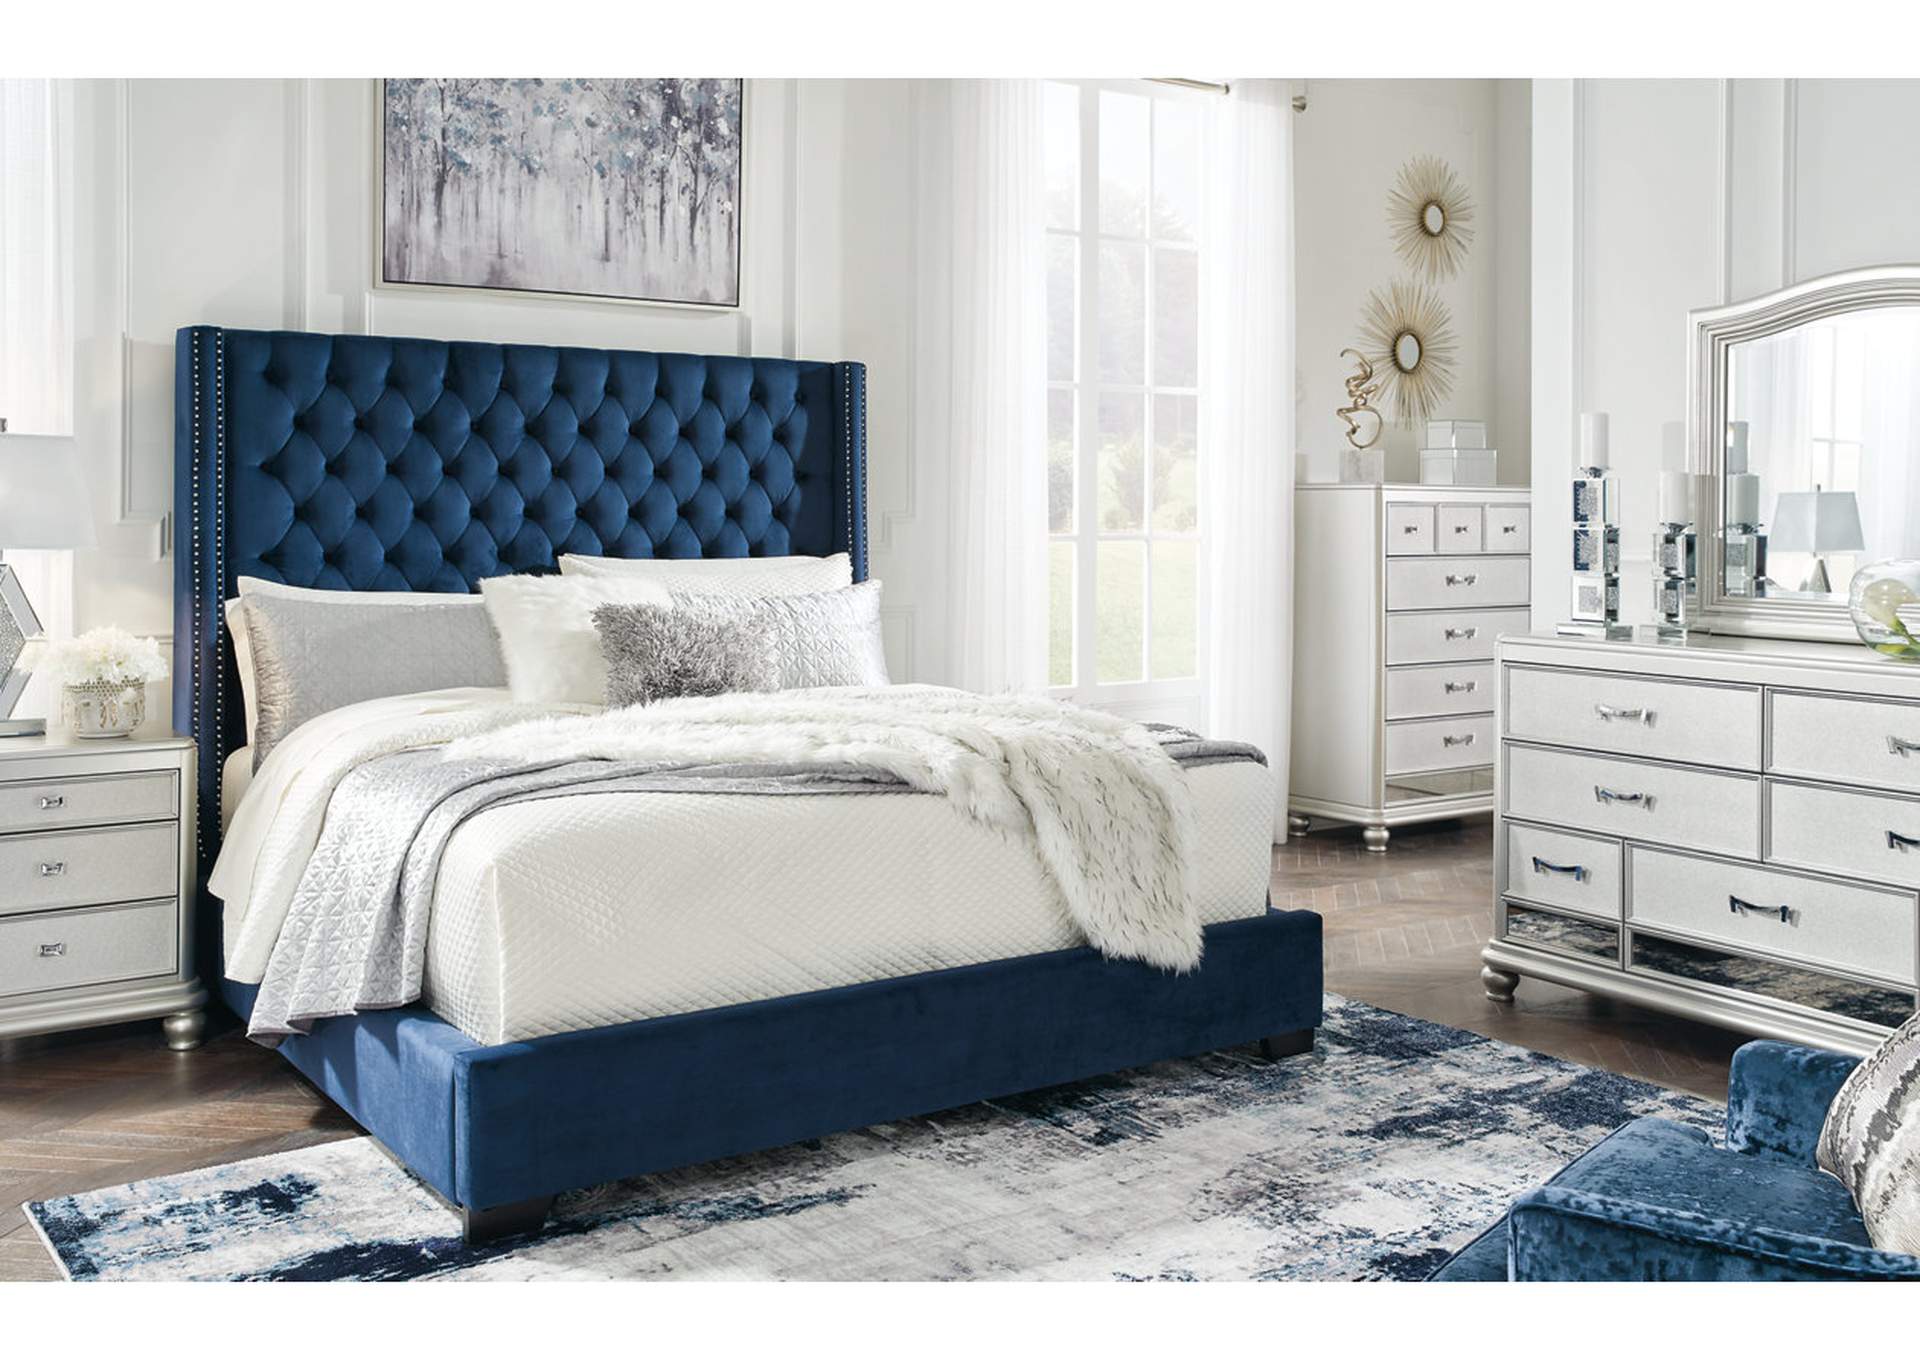 Coralayne King Upholstered Bed,Signature Design By Ashley